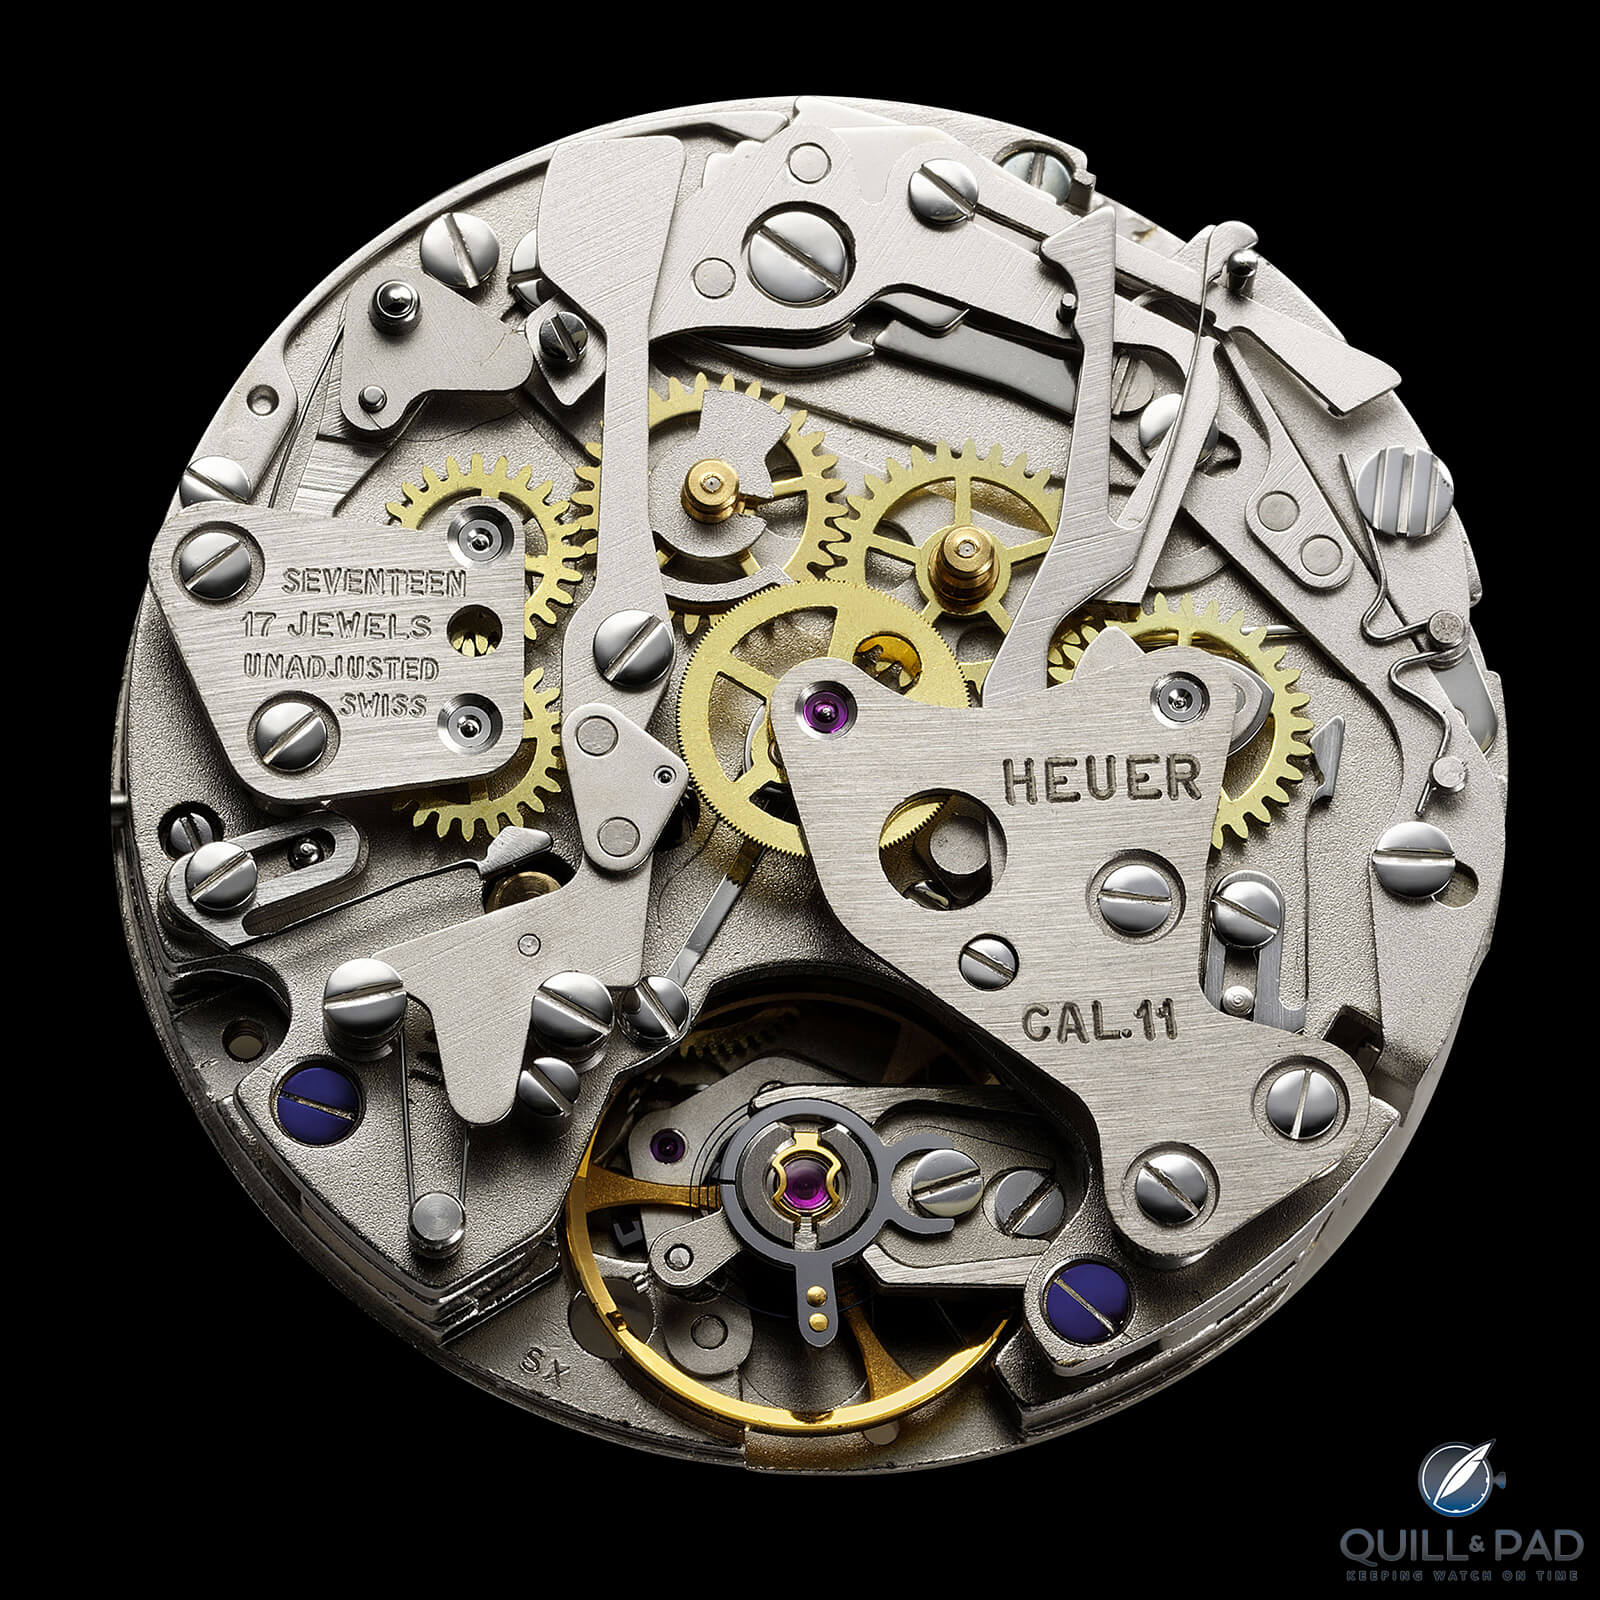 50 Years Of Automatic Chronographs And The Recent Debuts From Zenith, TAG  Heuer, And Seiko Commemorating The Milestone Invention(s) - Quill & Pad